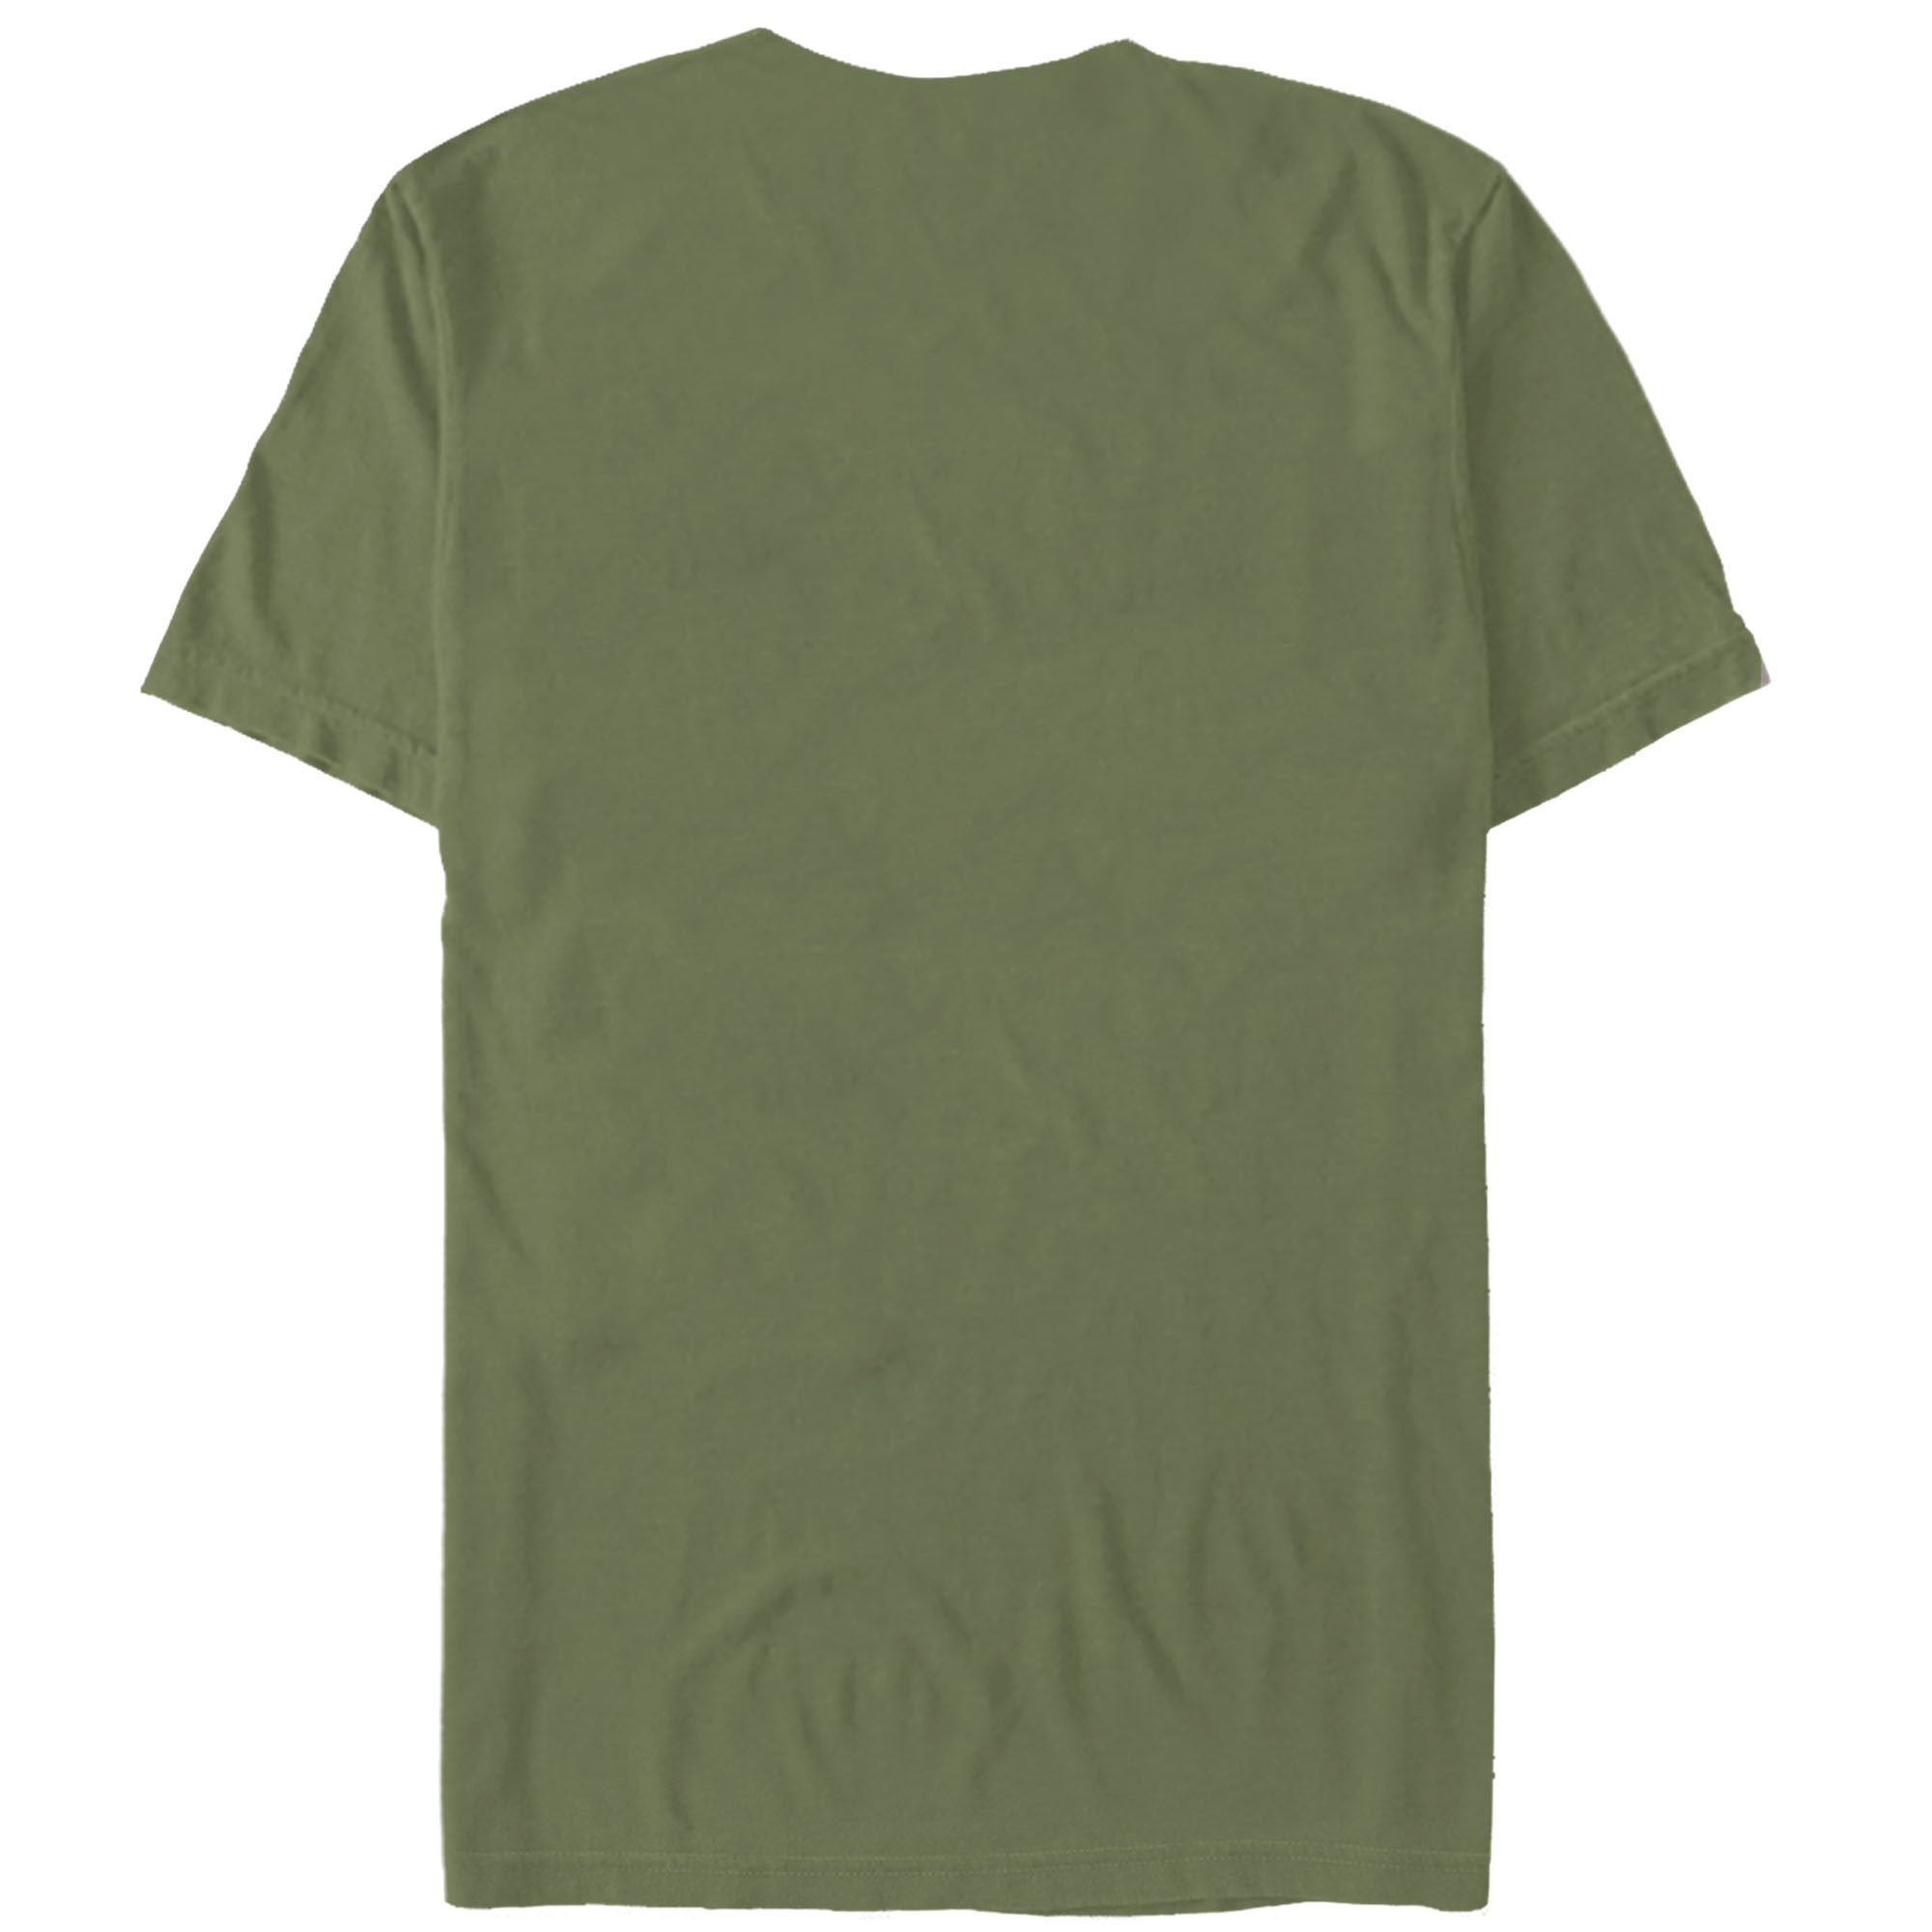 Men's Star Wars Yoda Best Dad Ever  Graphic Tee Military Green Large - image 3 of 4